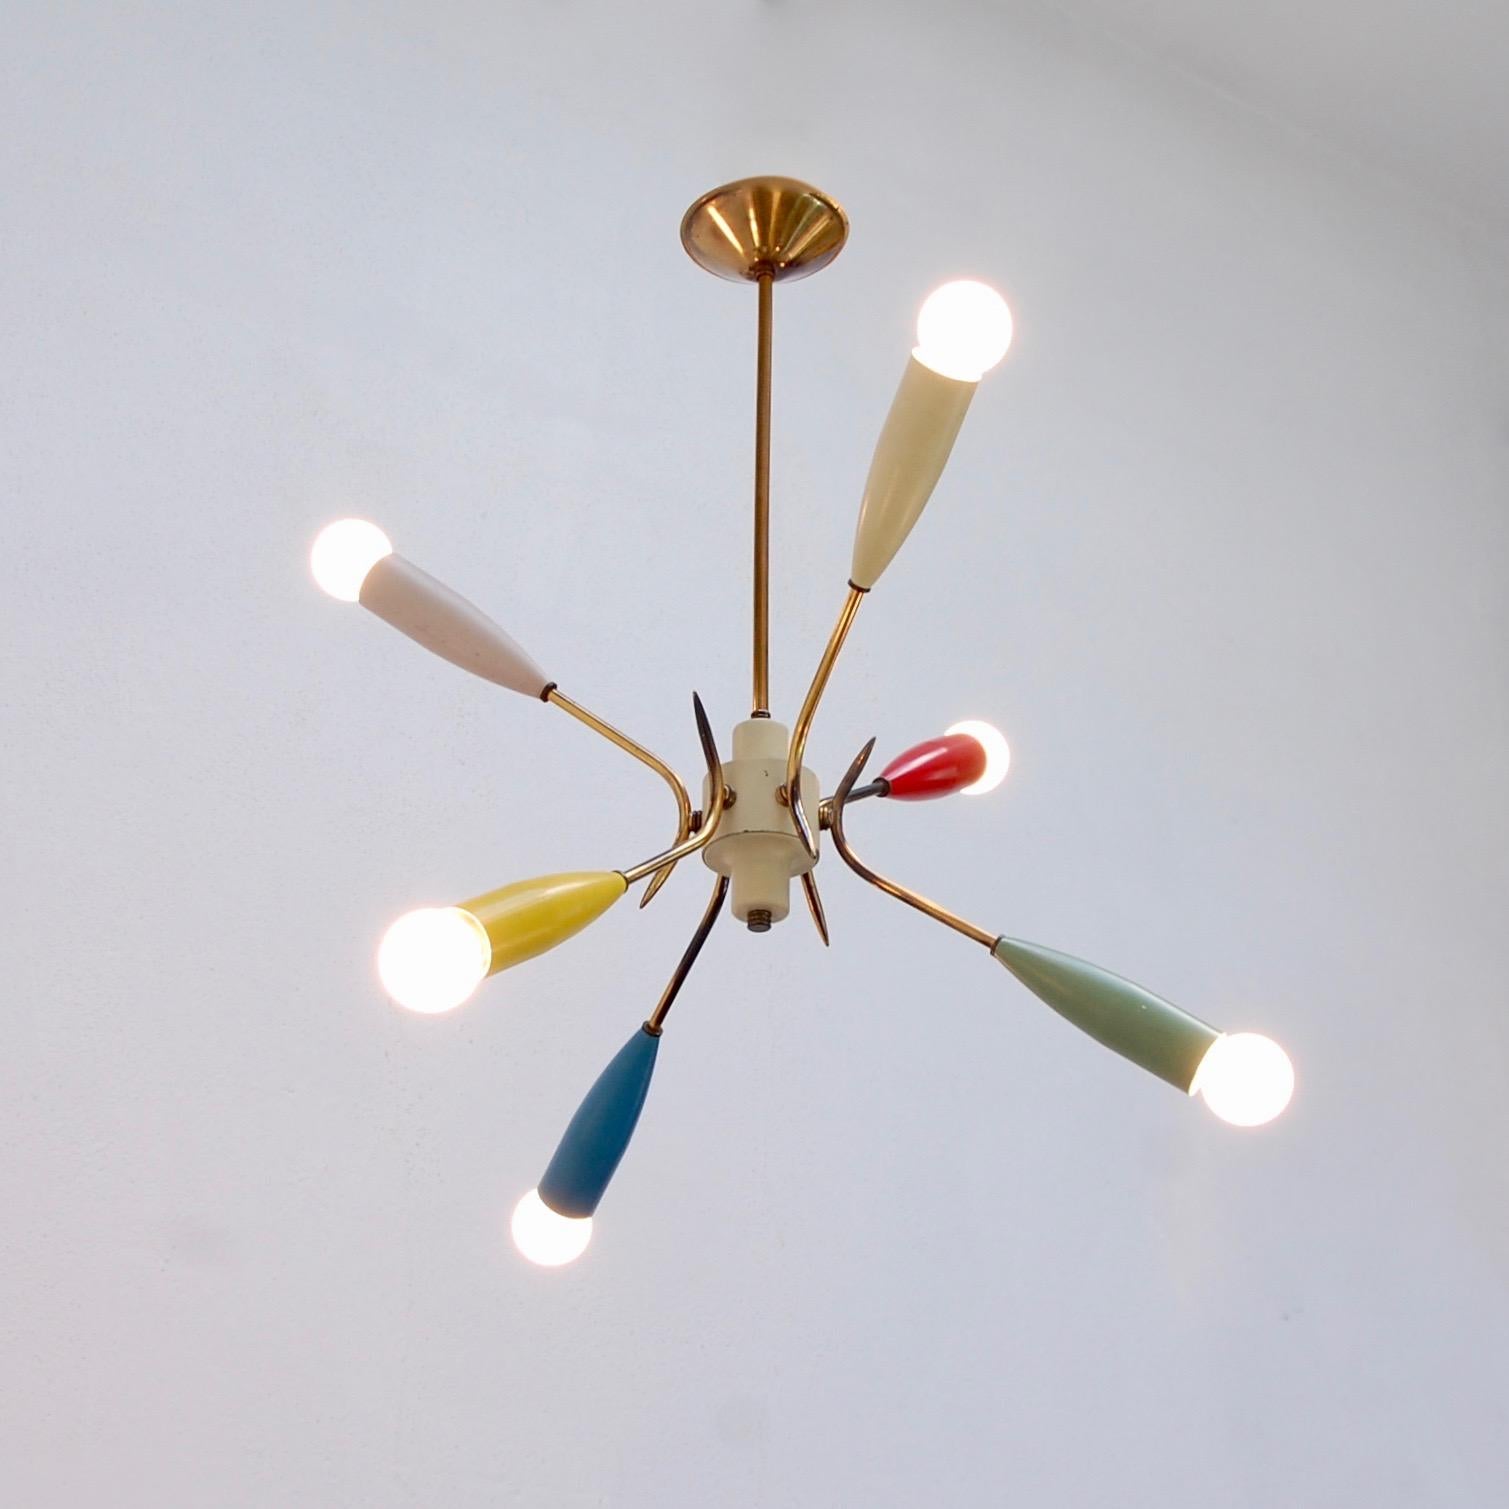 1950s colorful Sputnik chandelier from Italy. Partially restored, with original paint and brass finish. Rewired for use in the US with six E12 candelabra based sockets. Light bulbs included with purchase.
Measurements:
Diameter 23”
OAD: